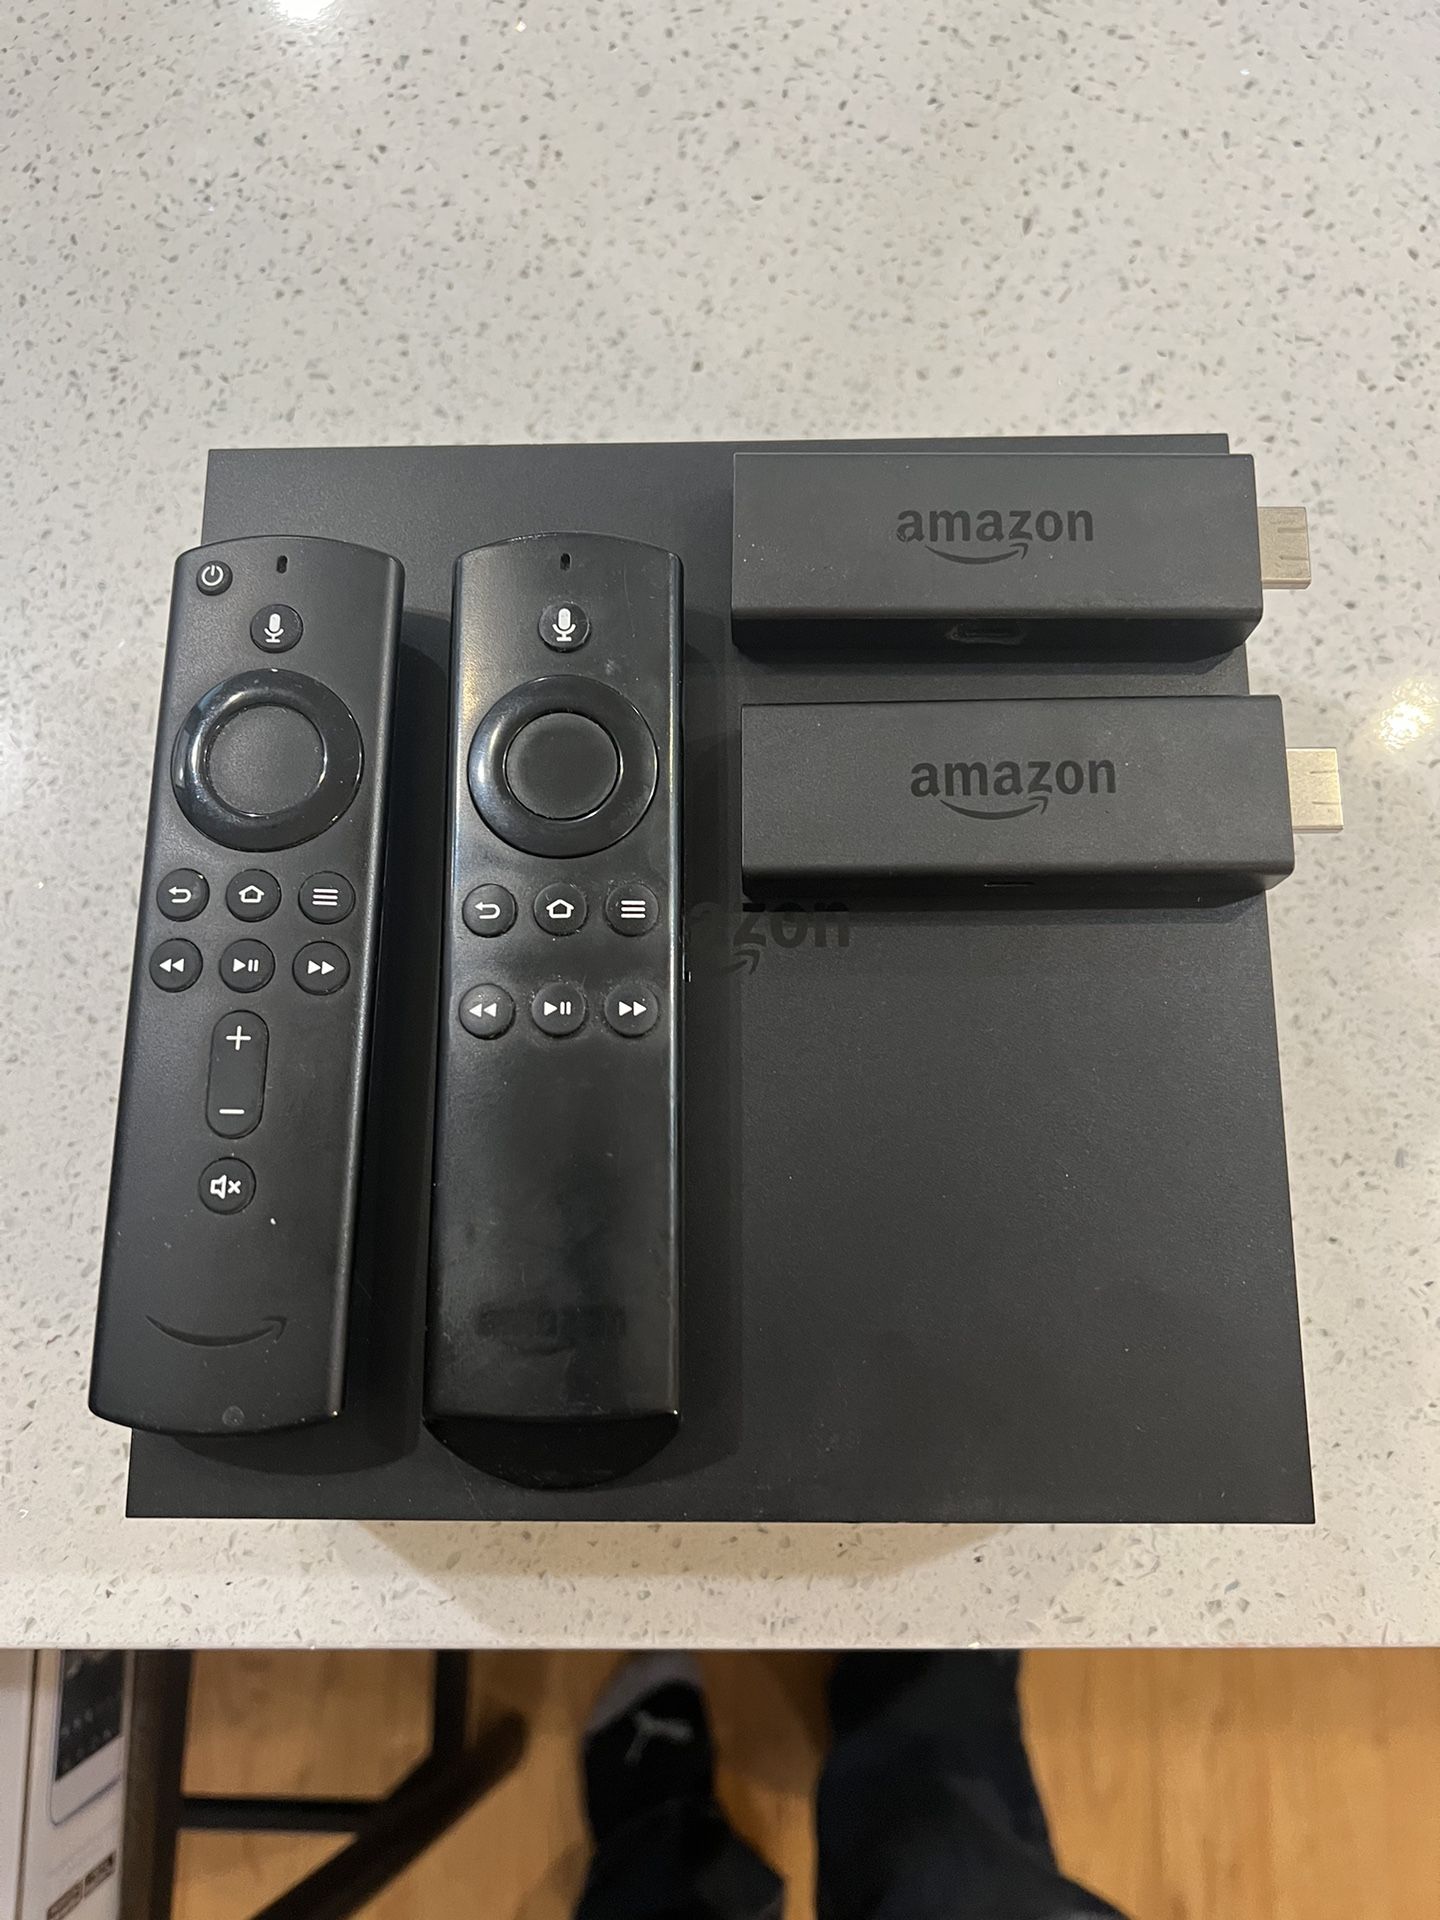 Amazon Fire Tv Recast 500gb Over The Air DVR With 2 Fire sticks And Remotes